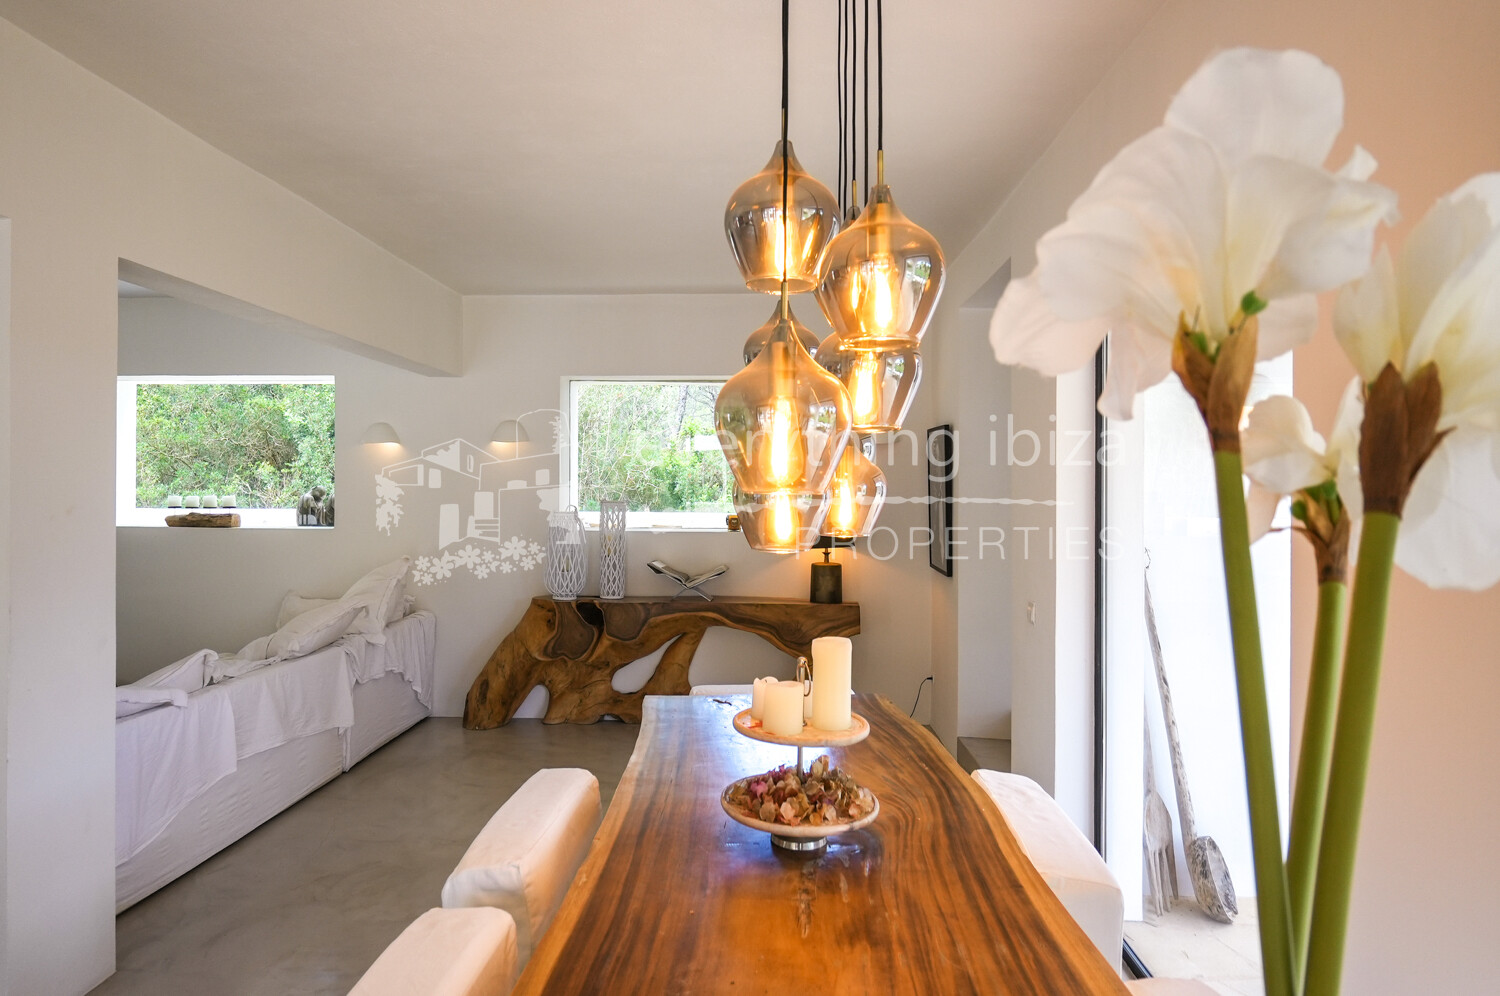 Stunning Villa on a Large Plot in the Peaceful Countryside of Sant Miguel, ref. 1513, for sale in Ibiza by everything ibiza Properties